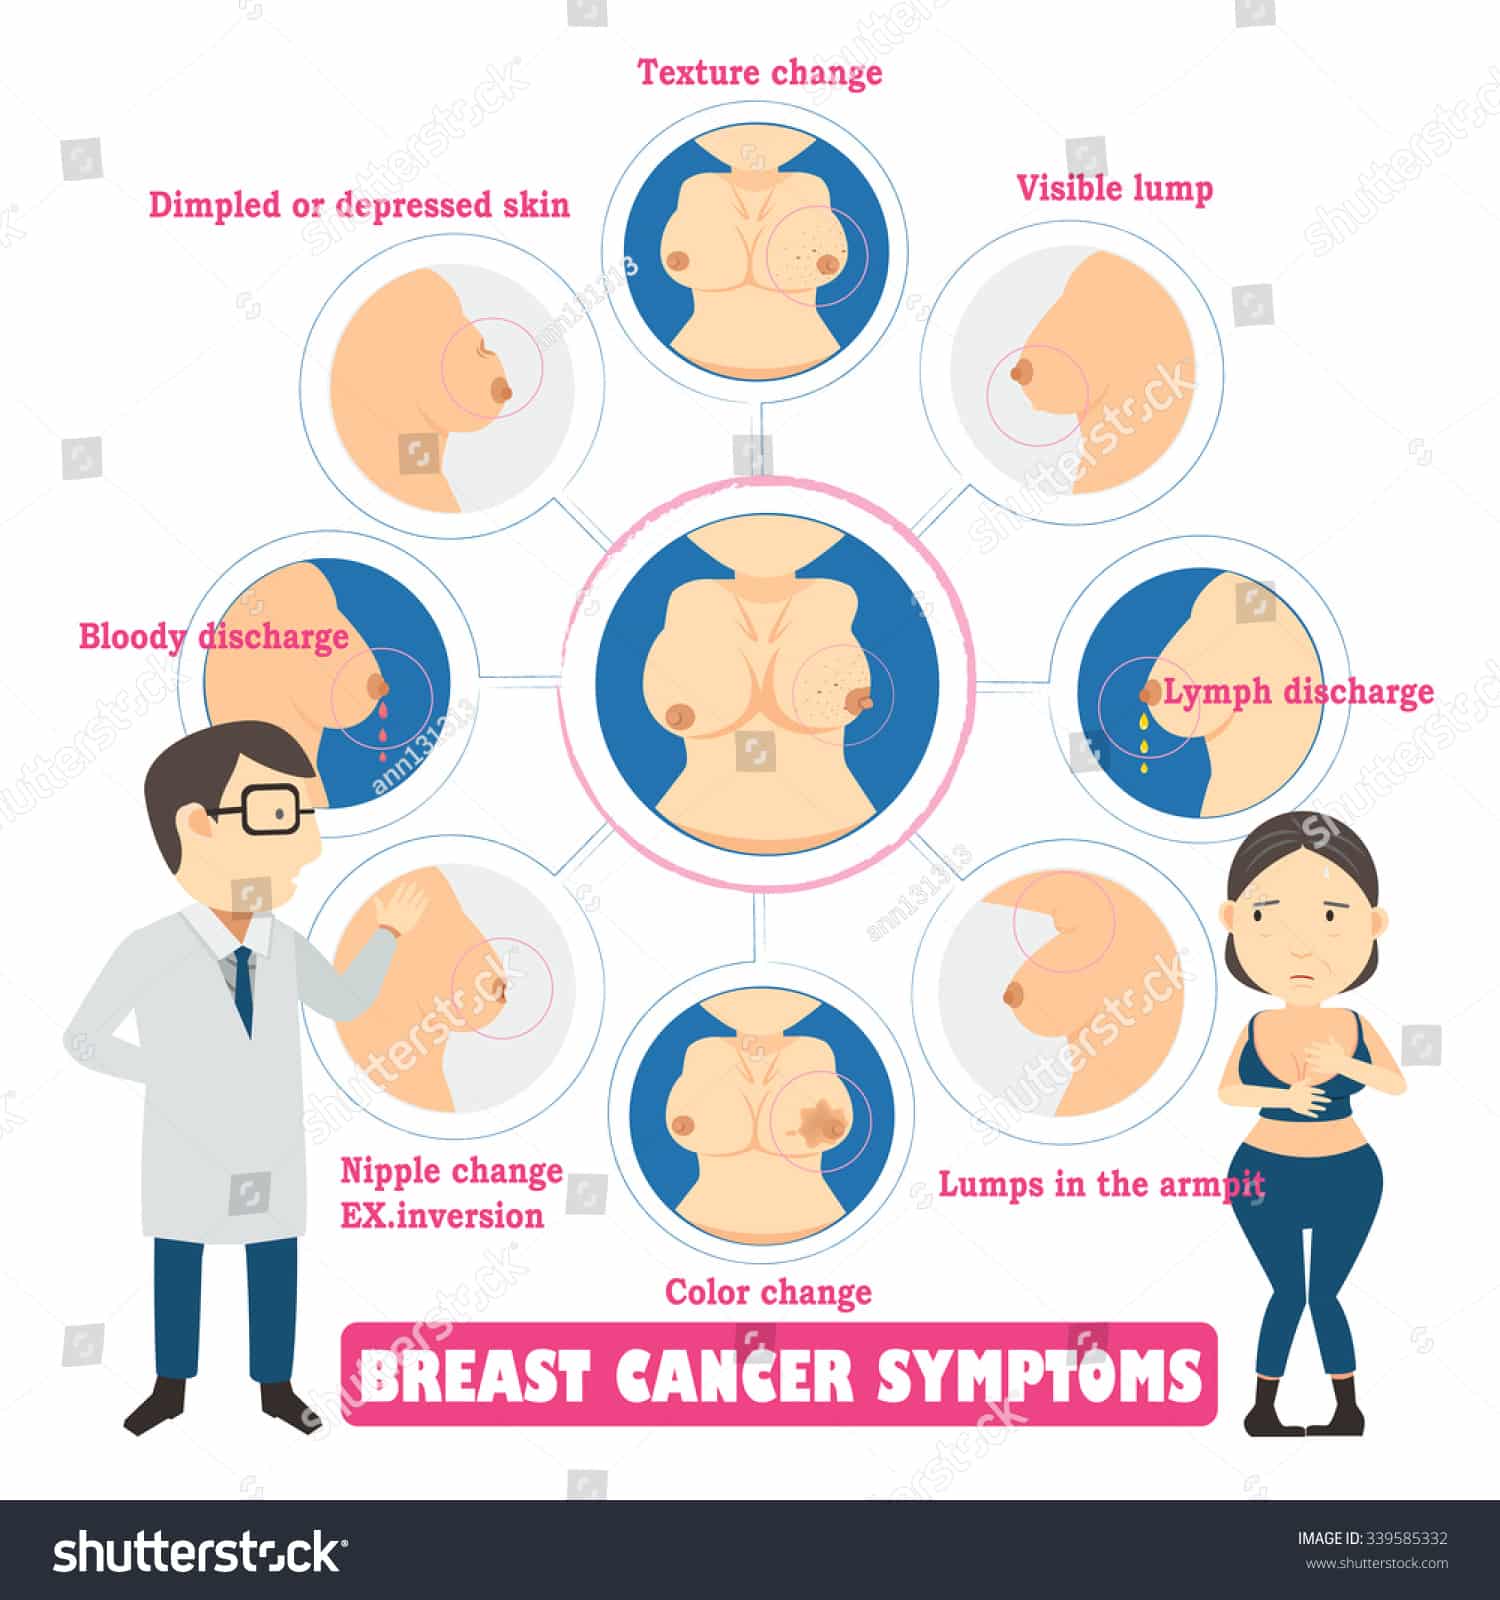 Breast Cancer Symptoms Circlesinfo Graphic Vector Stock Vector ...